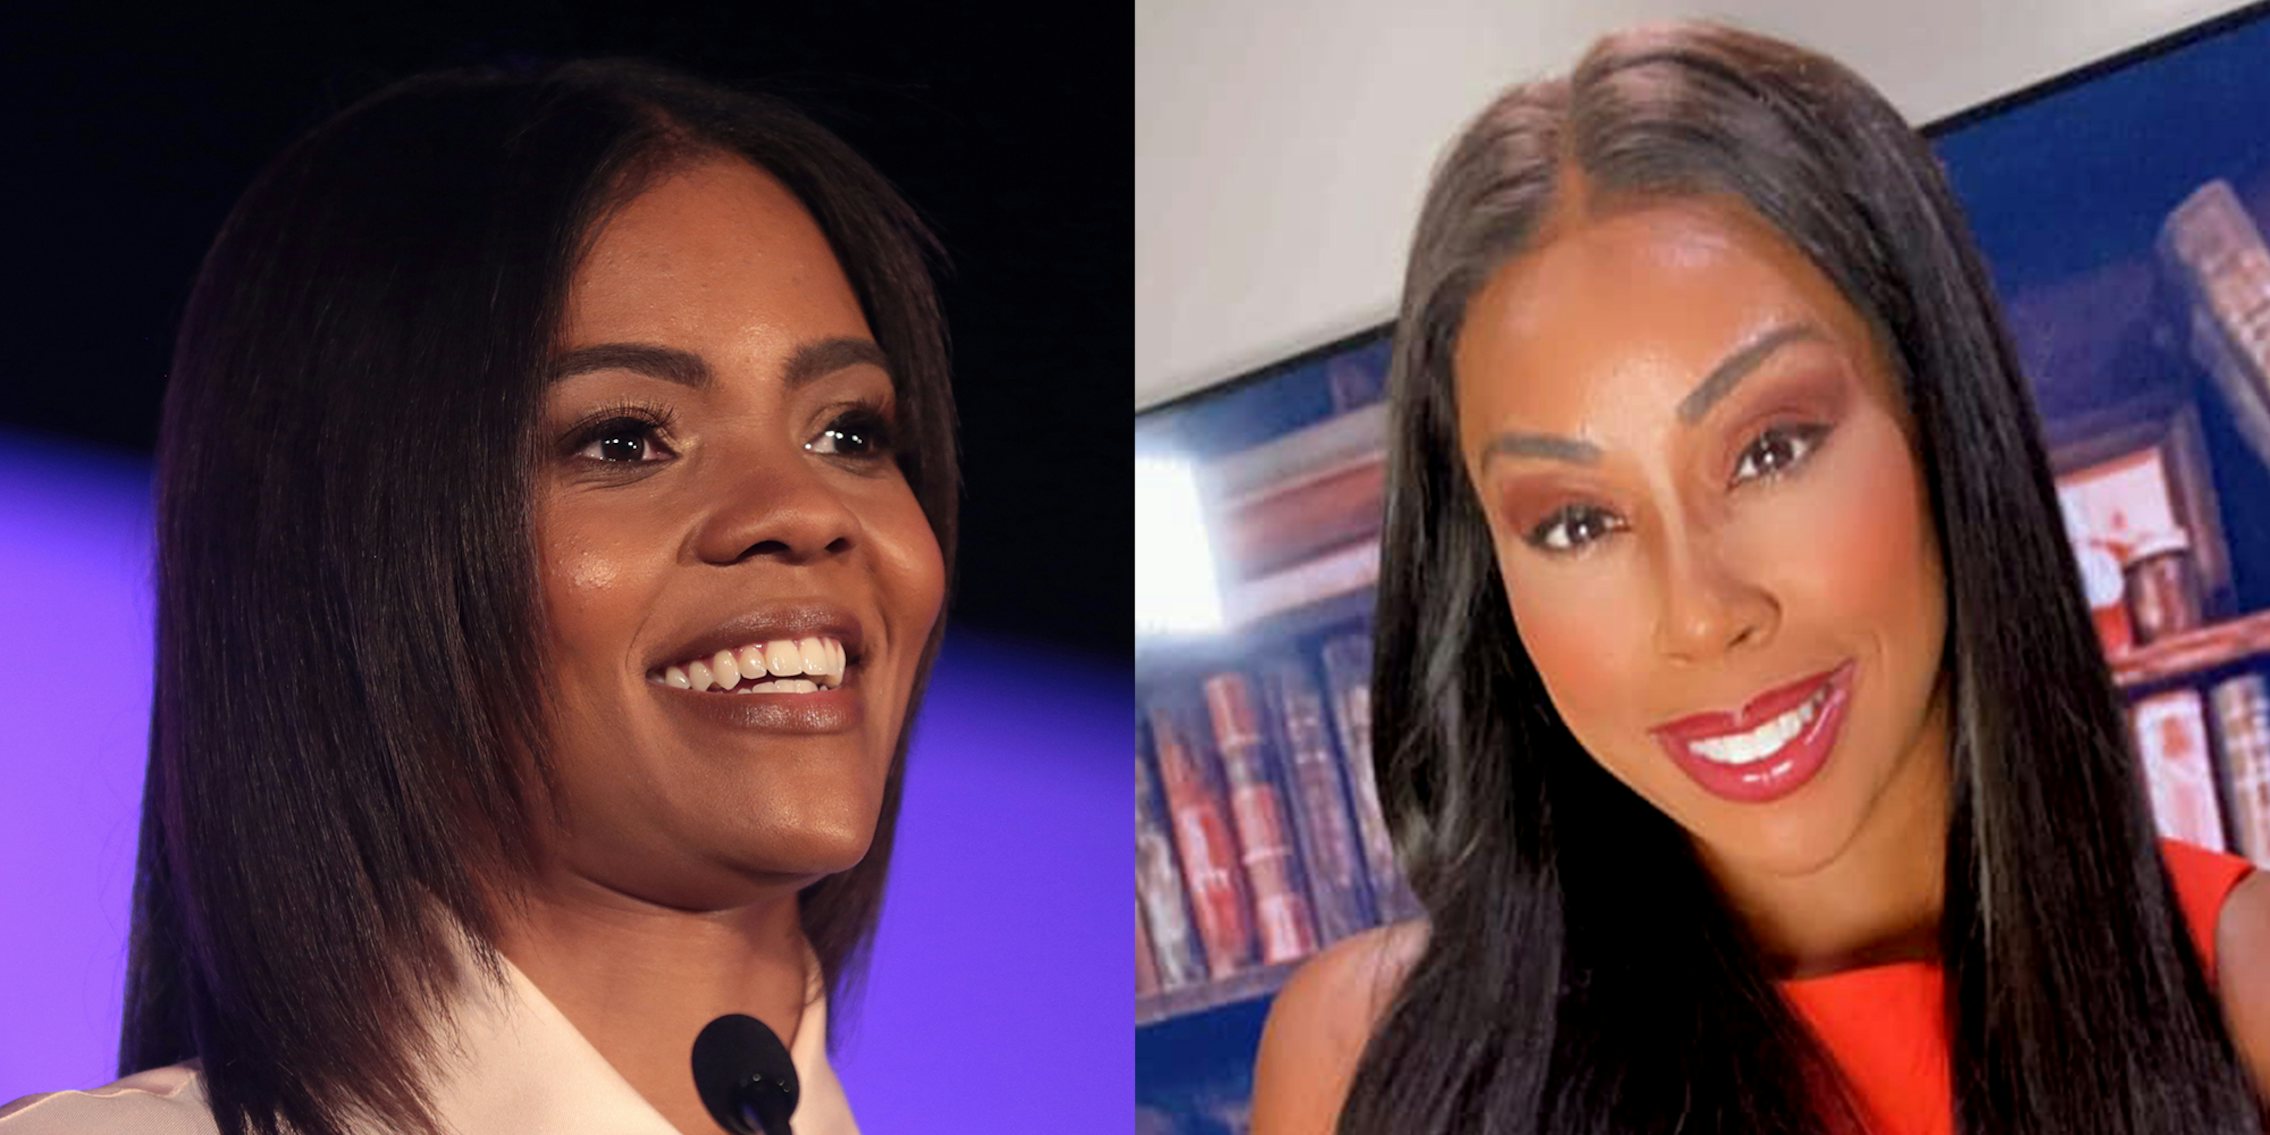 Candace Owens: Republican Files Defamation Suit Over Instagram Video